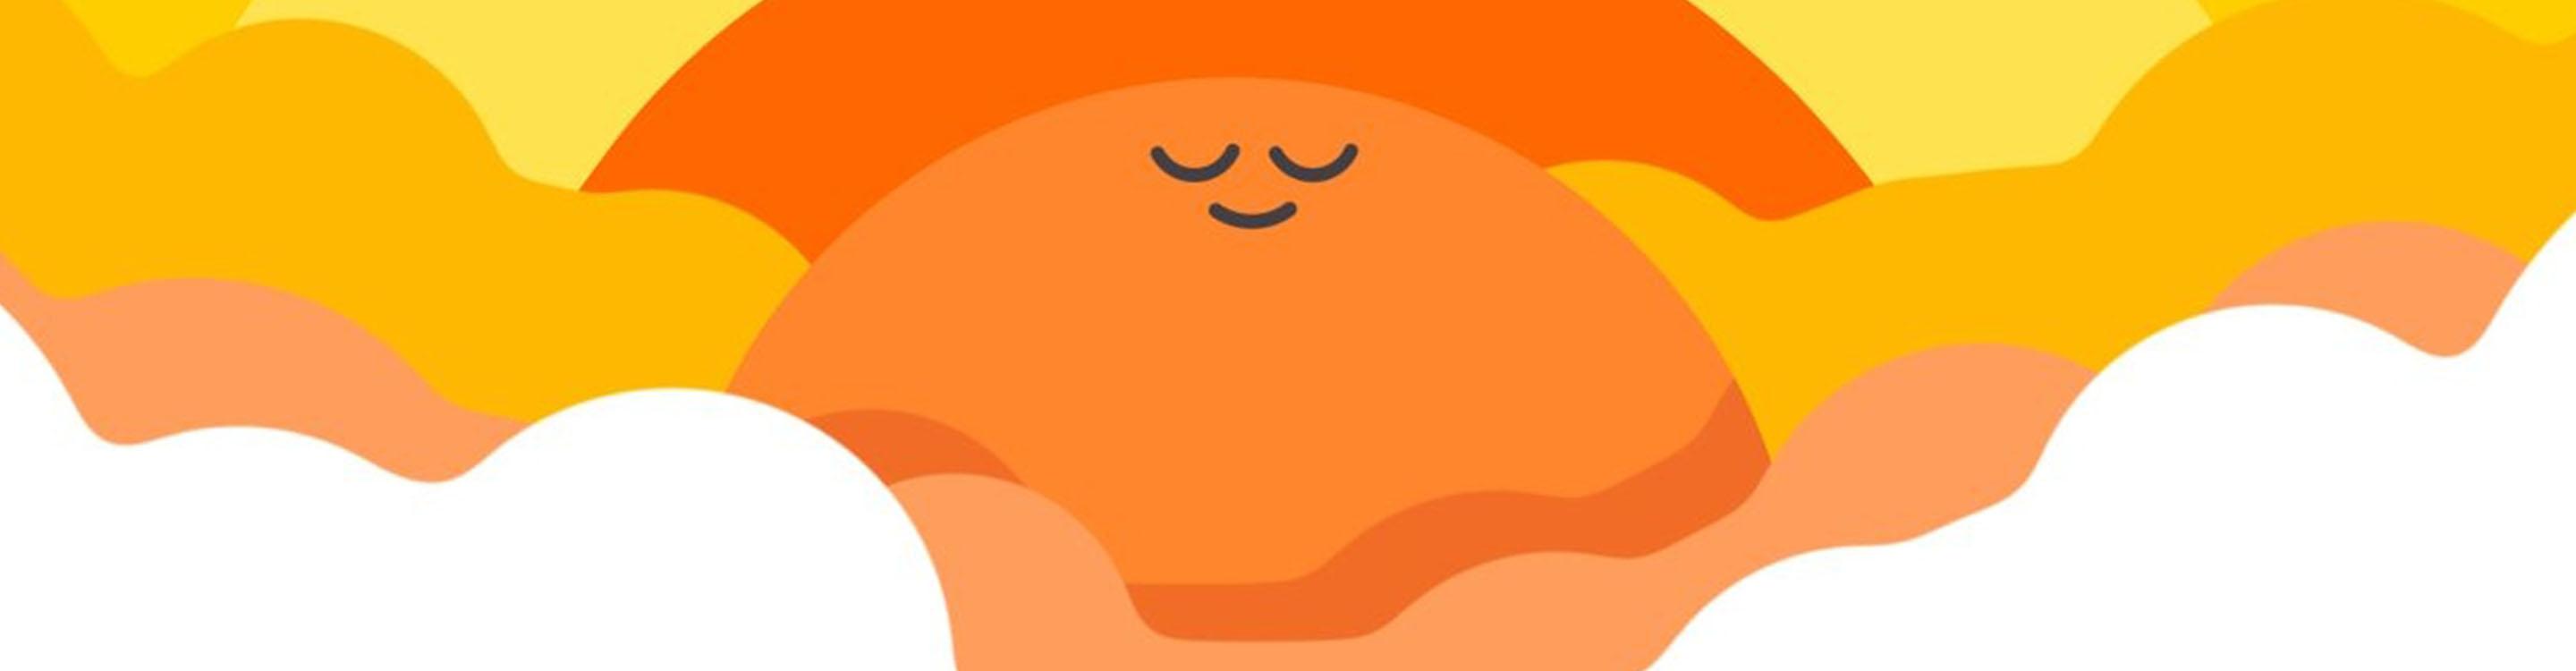 brand image for meditation app: Headspace